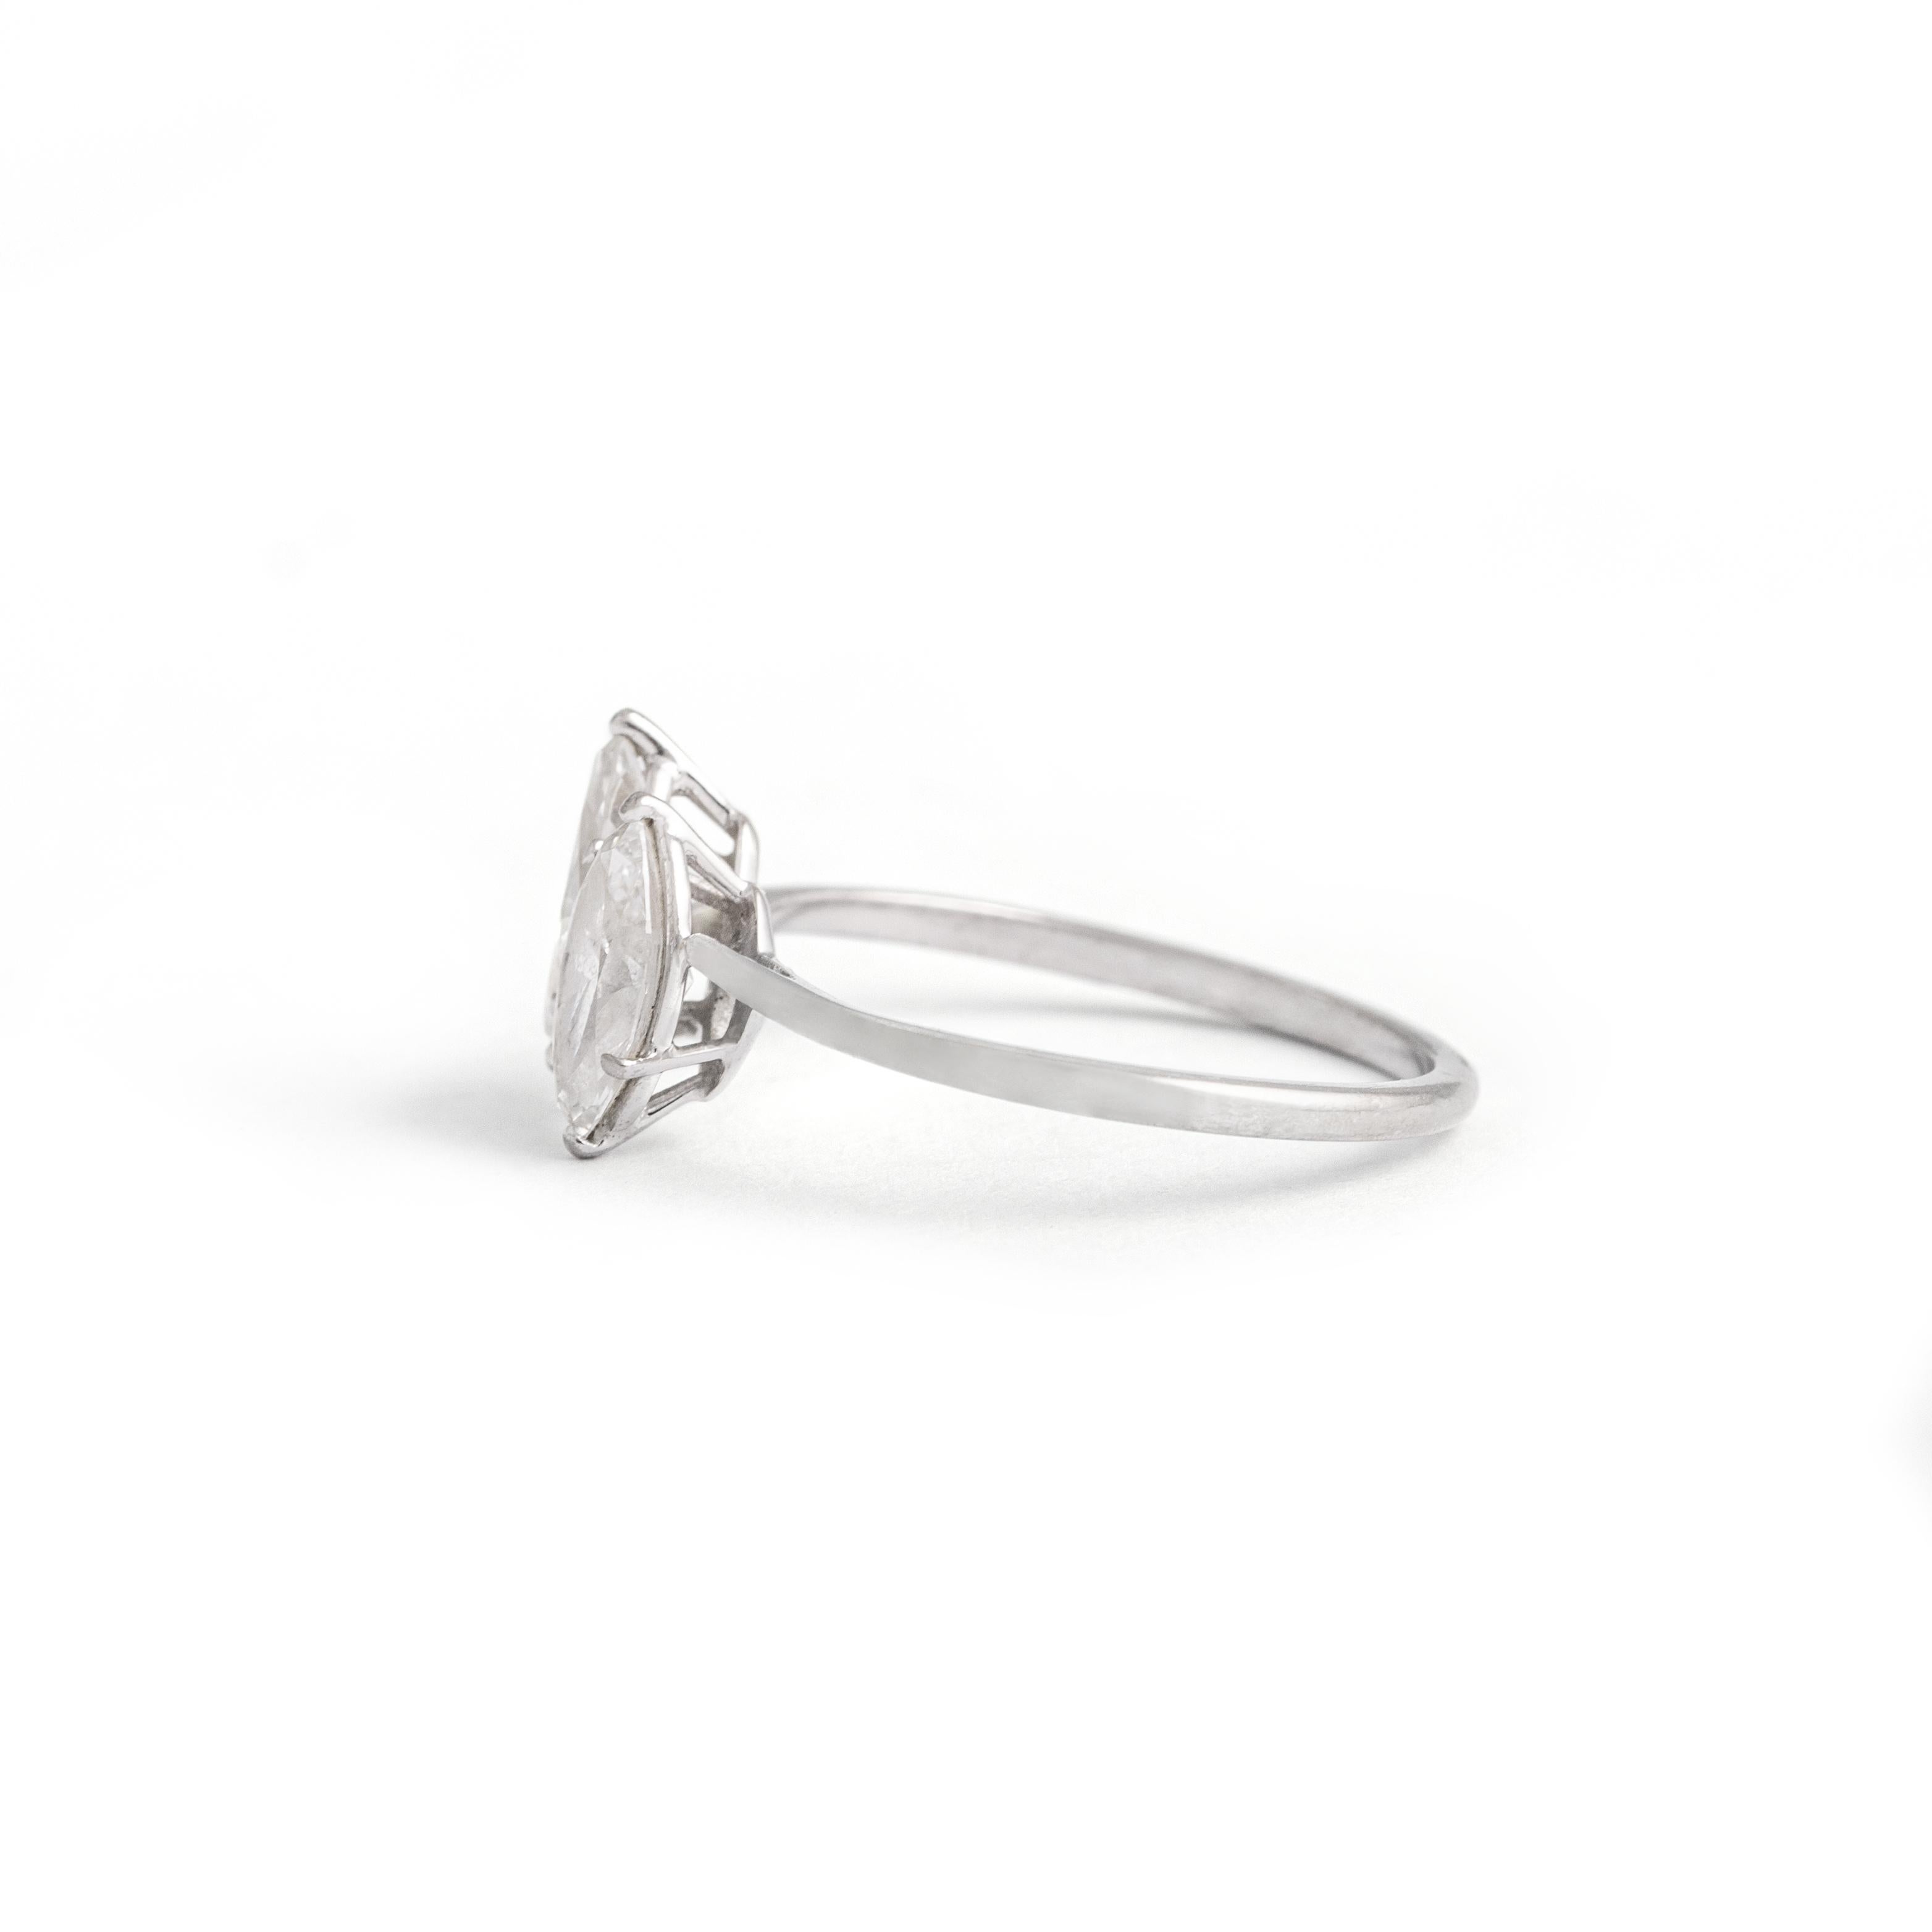 Two Diamonds Marquise shape on White Gold Ring.
Size: 6.5 US.
Total weight: 1.93 grams.